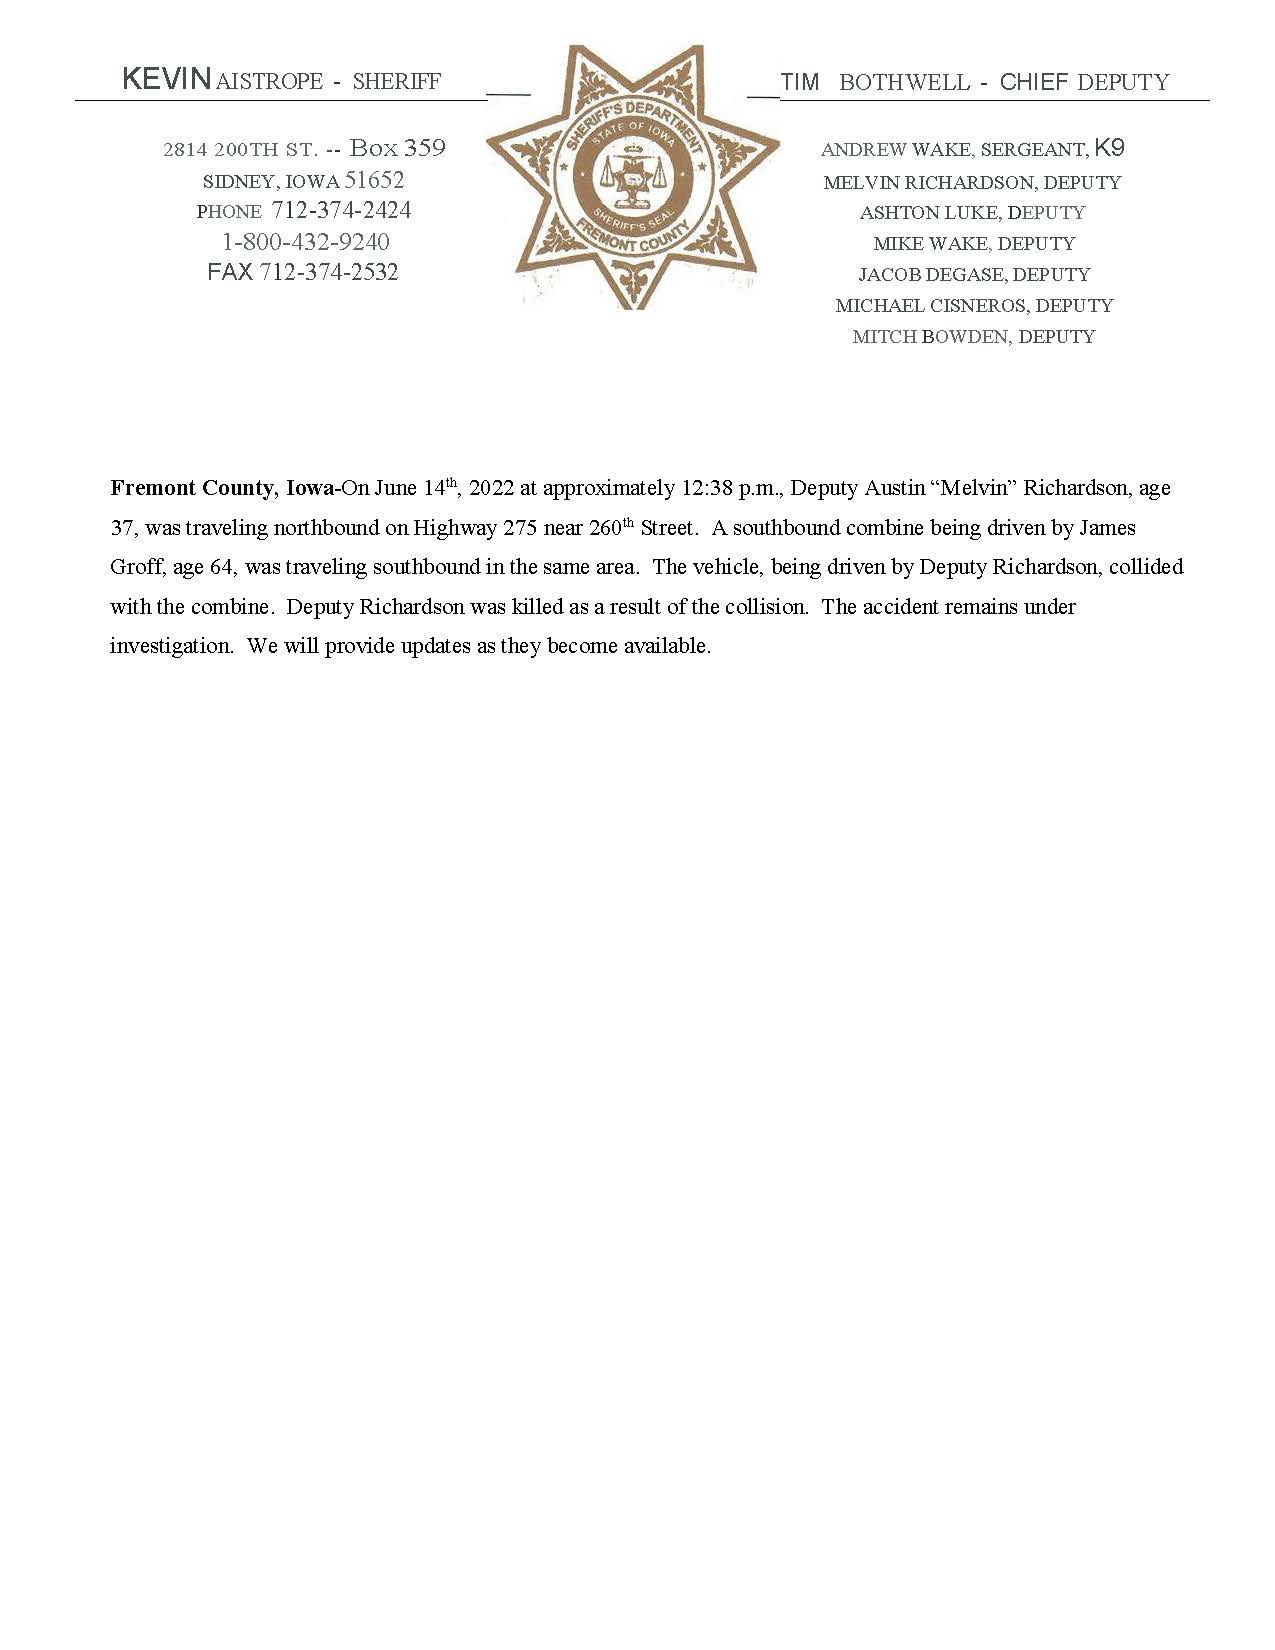 Link to Fremont County press release